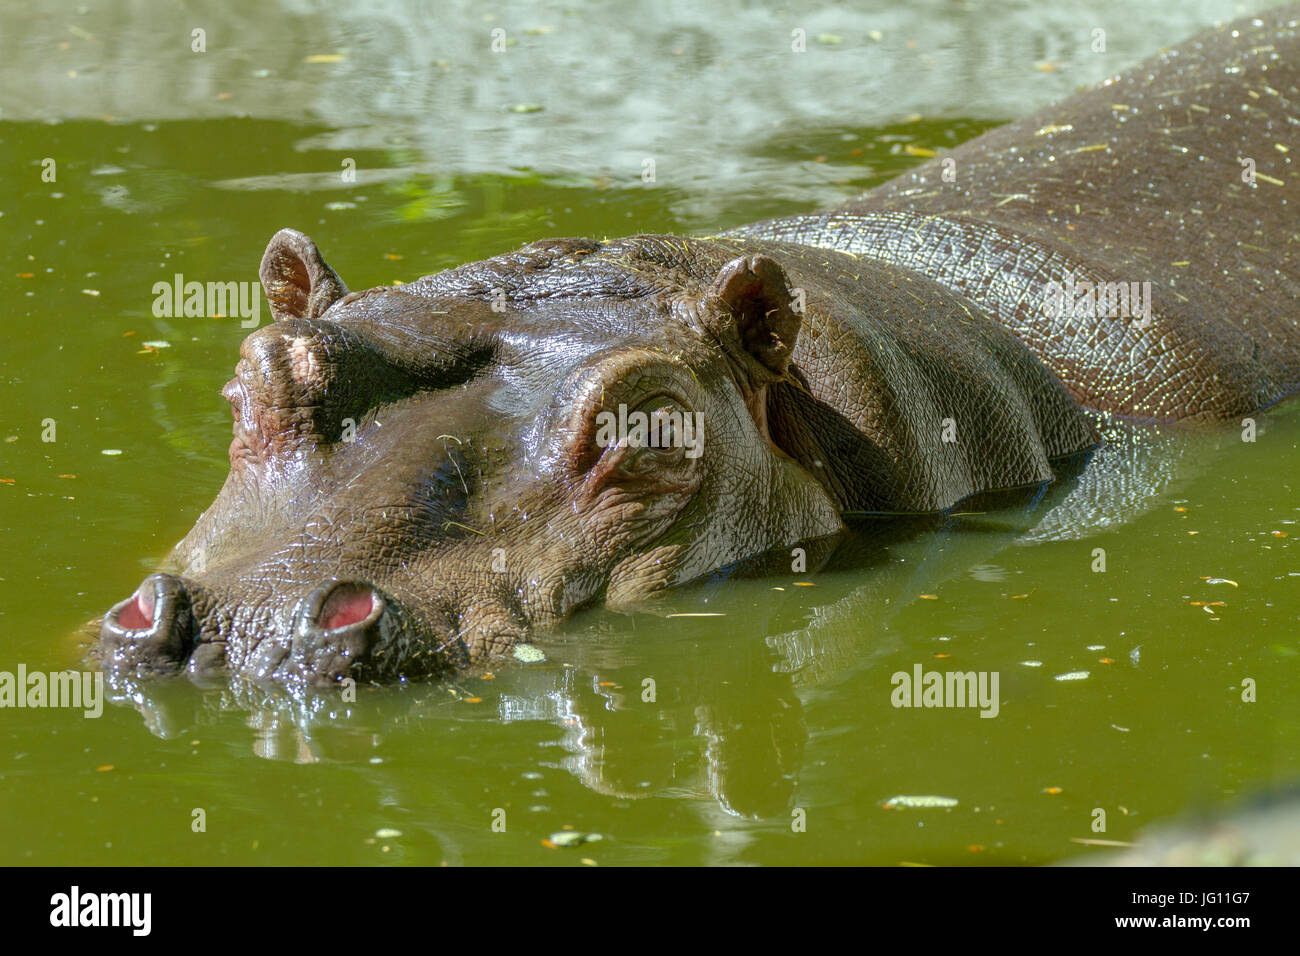 Image of a large mammal of a wild animal, hippopotamus in water Stock Photo  - Alamy